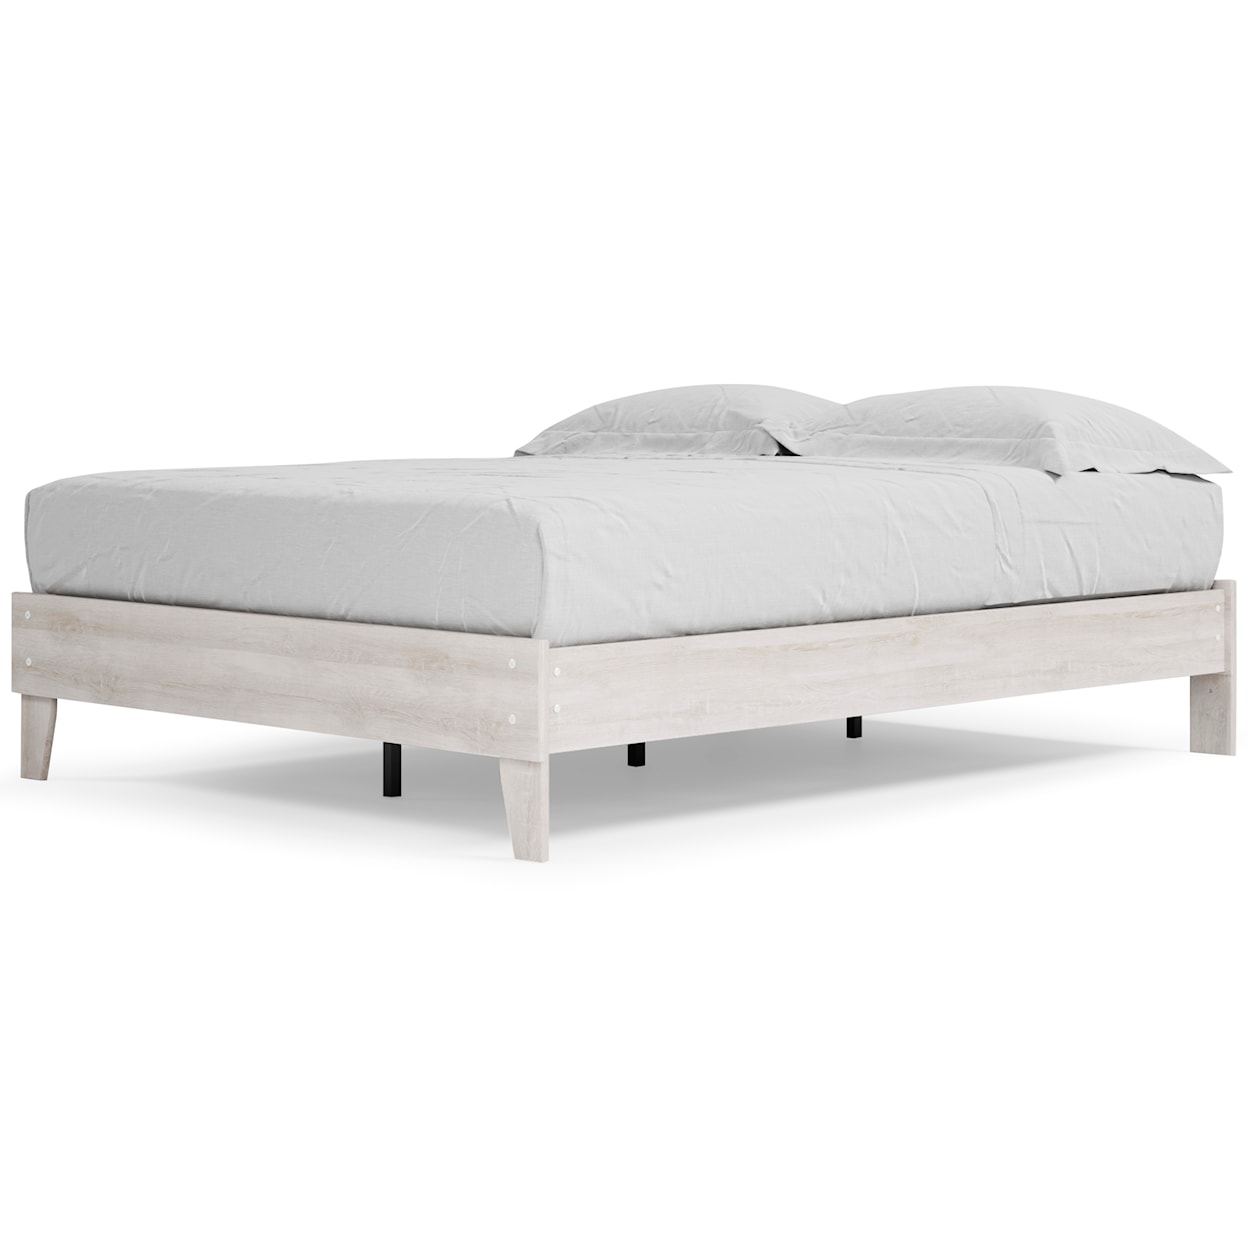 Signature Design by Ashley Paxberry Queen Platform Bed